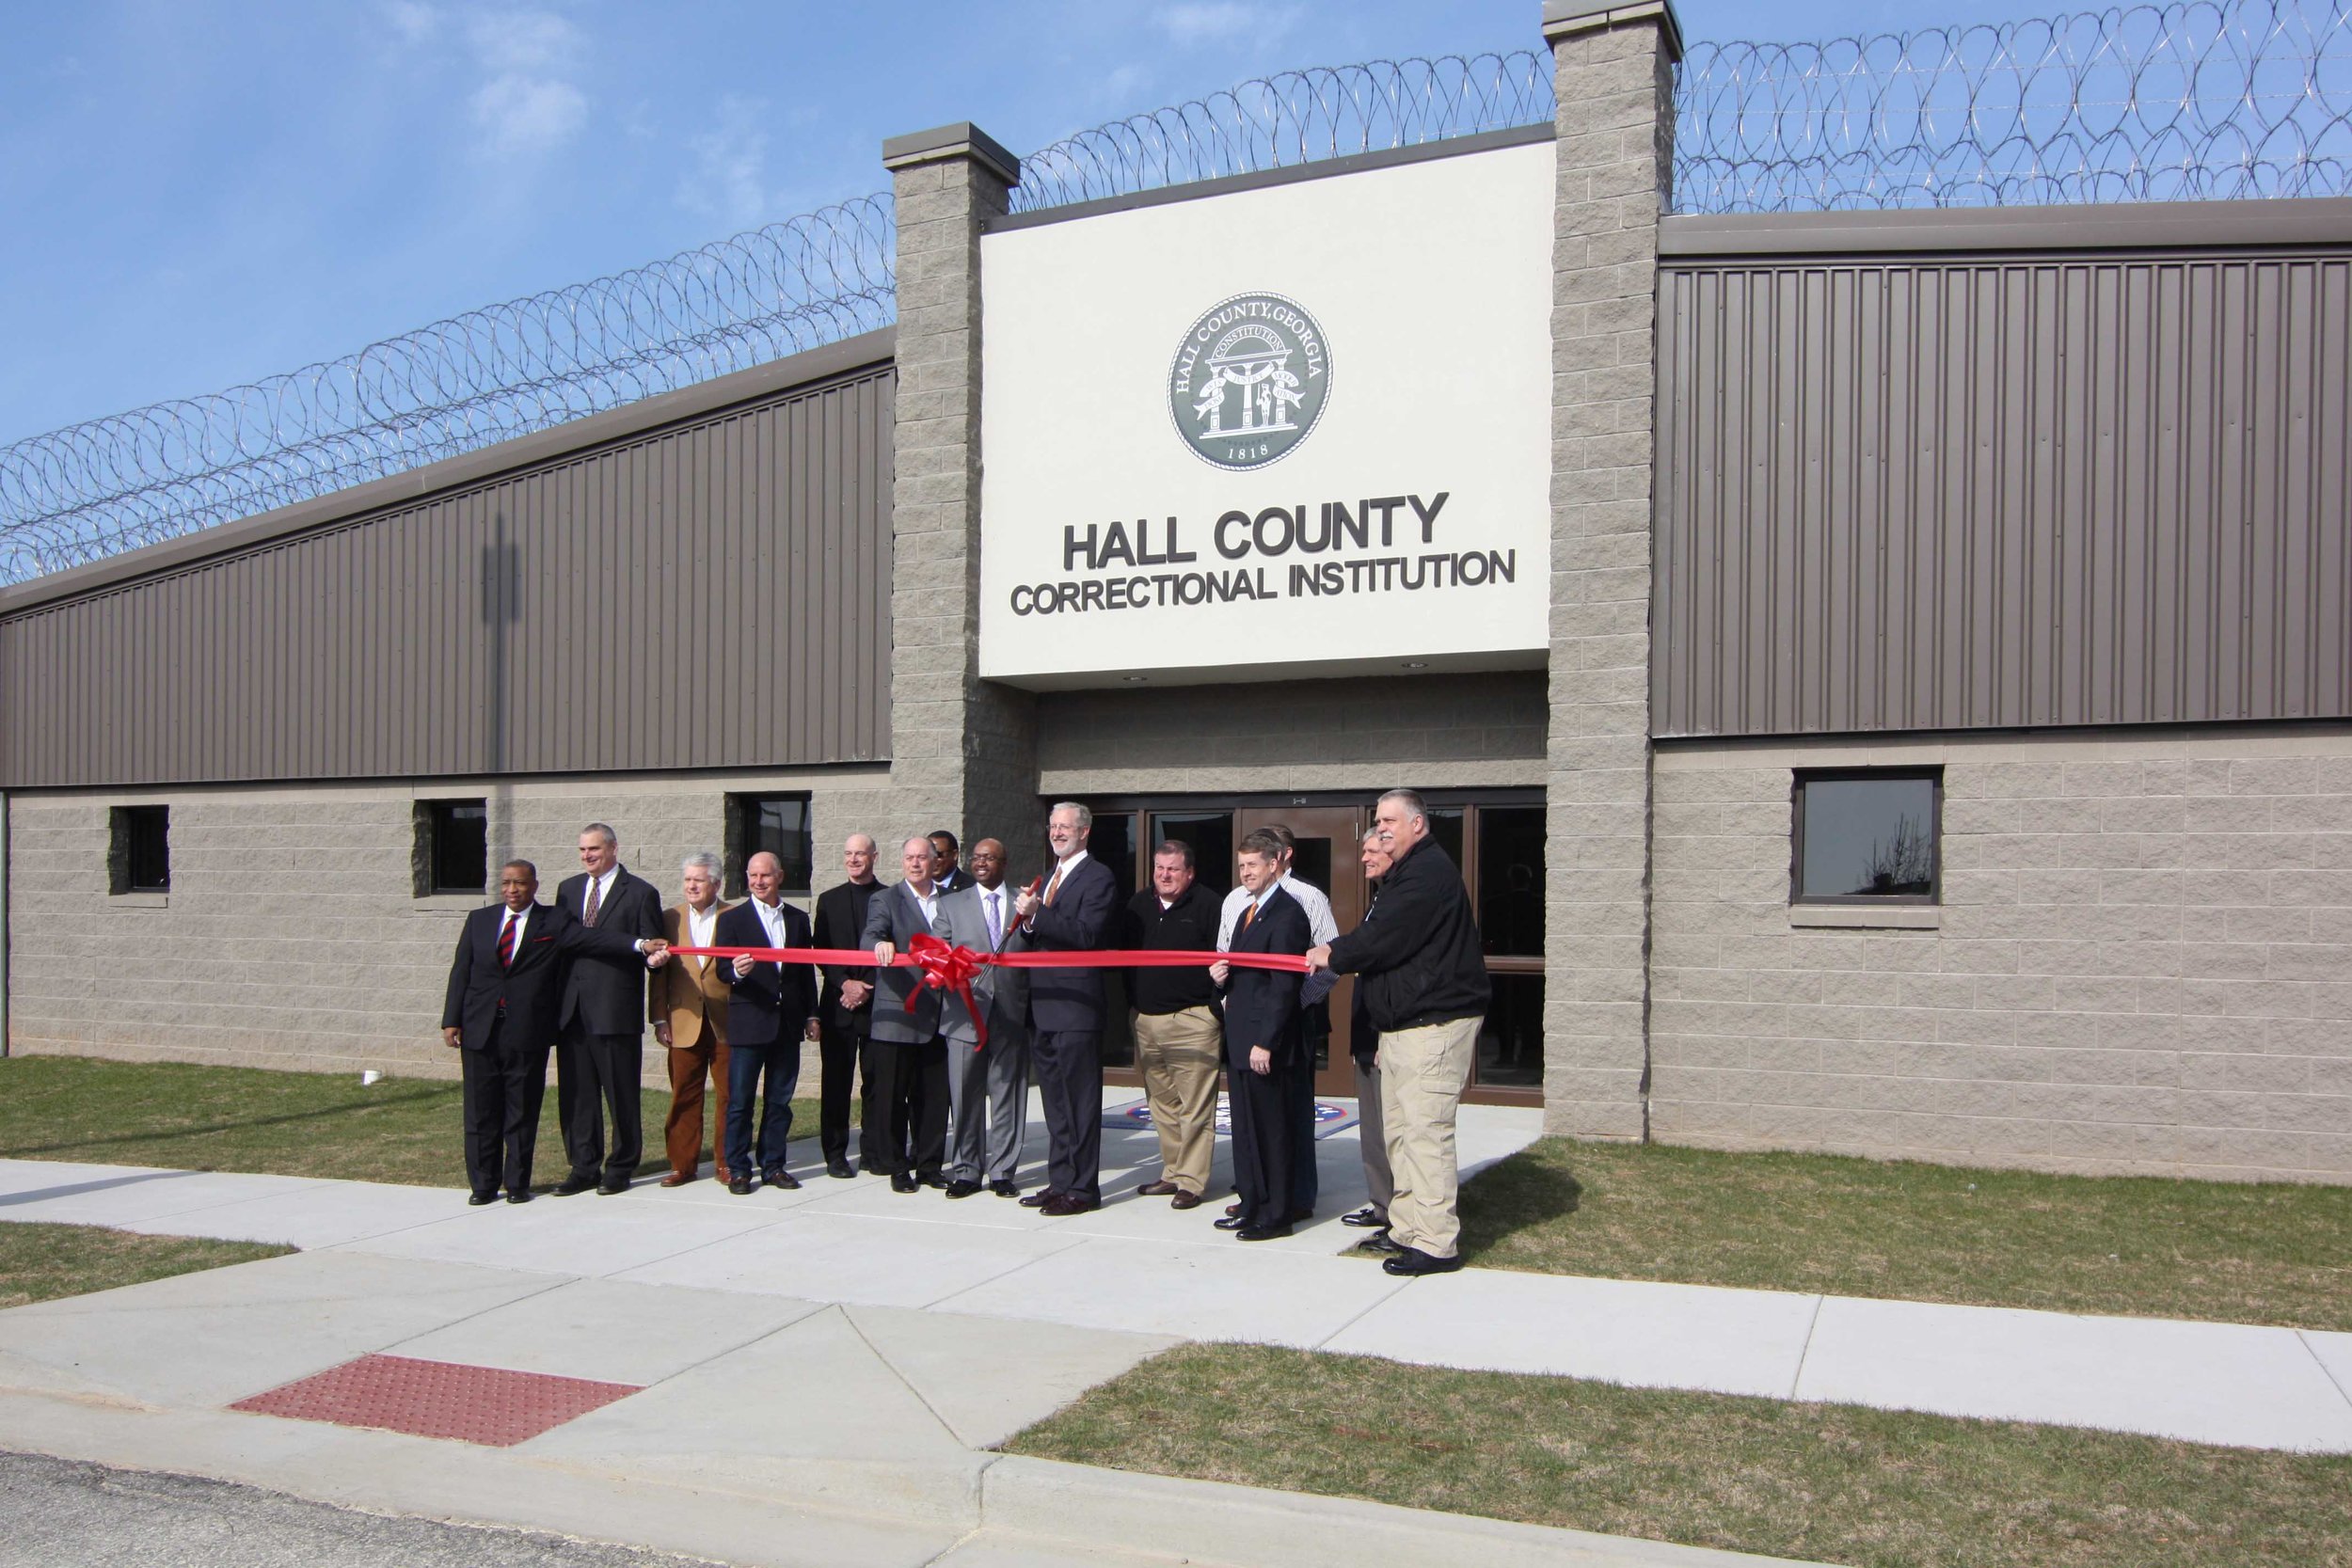 Hall County Correctional Institution